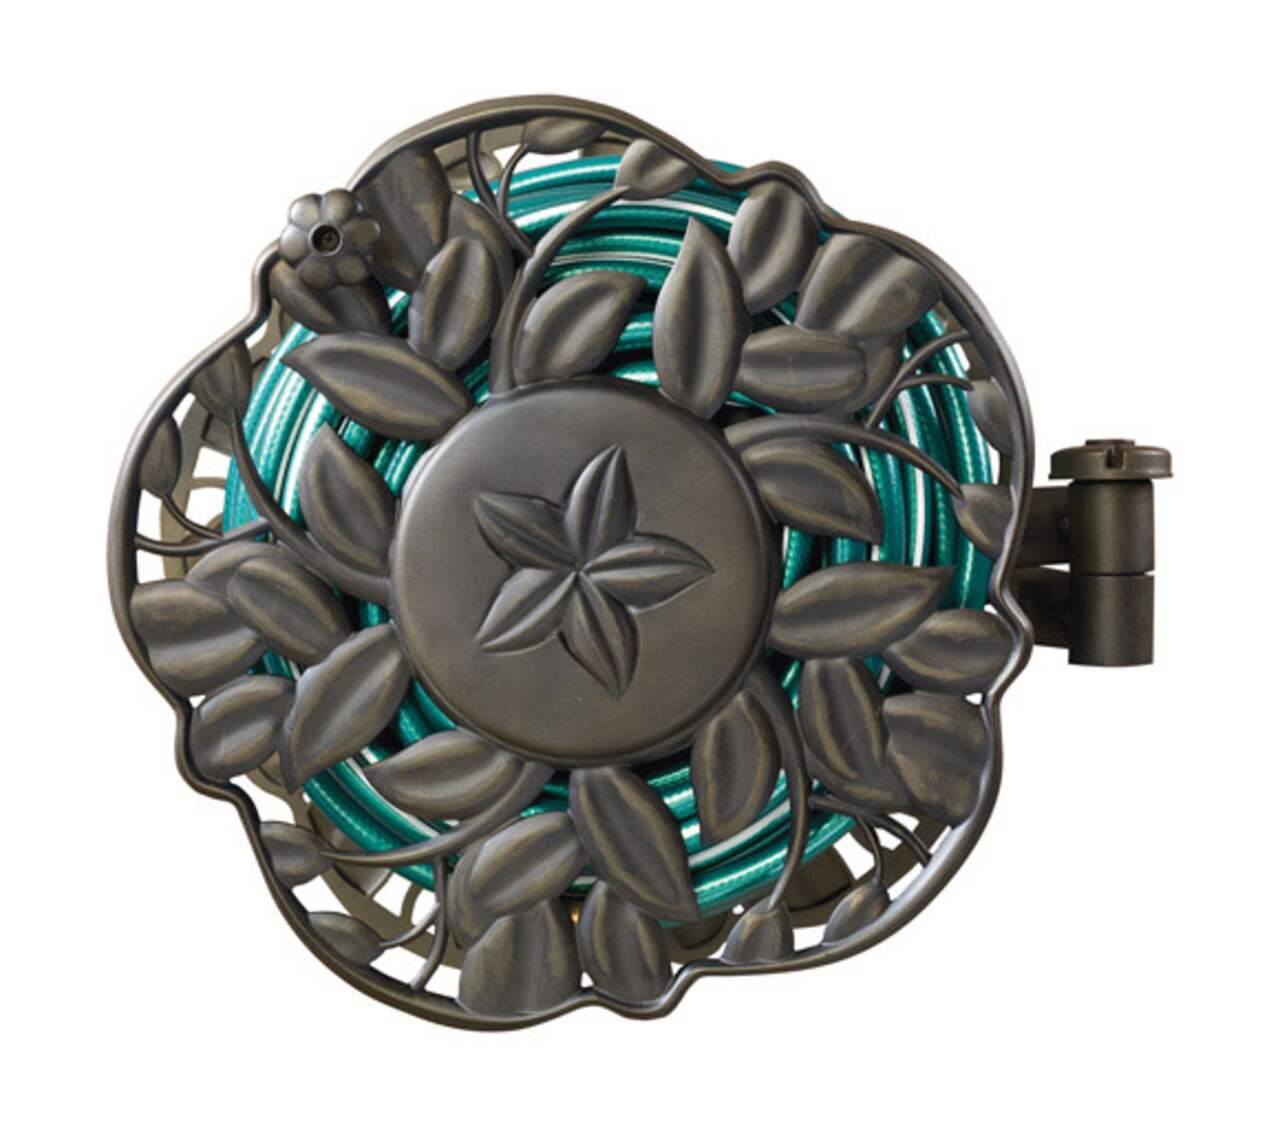 https://media-www.canadiantire.ca/product/seasonal-gardening/outdoor-tools/watering/0591605/ames-metal-flower-wall-mount-hose-reel-3dc17ee1-2565-4b9d-8c36-ede0ecab3965.png?imdensity=1&imwidth=640&impolicy=mZoom